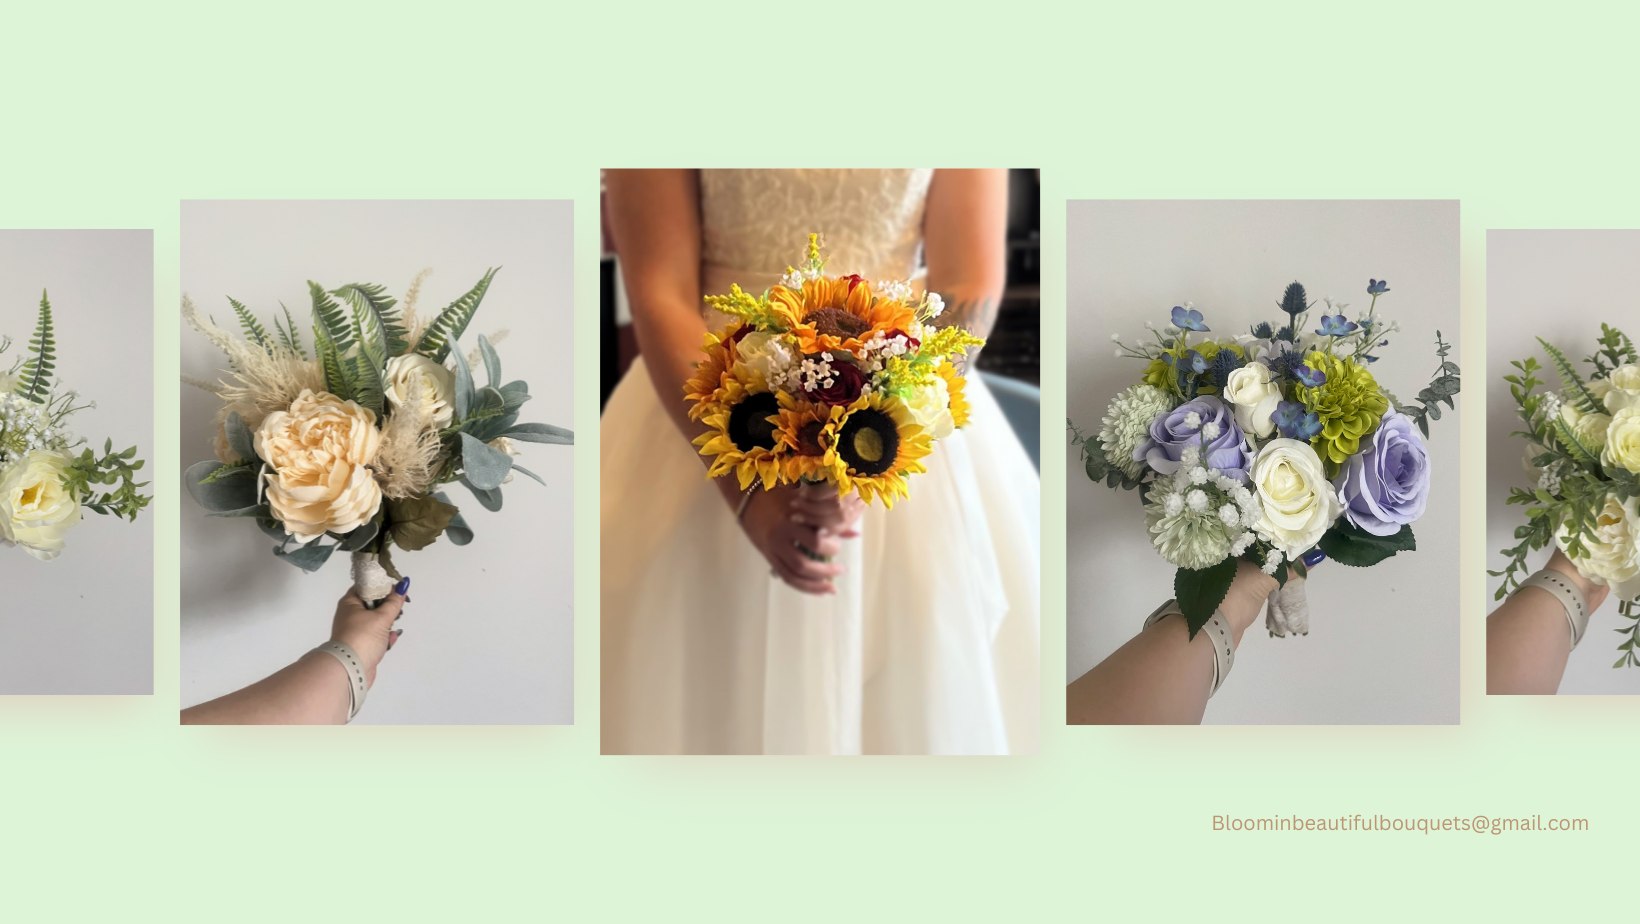 Bloomin' Beautiful Bouquets - Specialist in artificial silk flower bouquets & displays